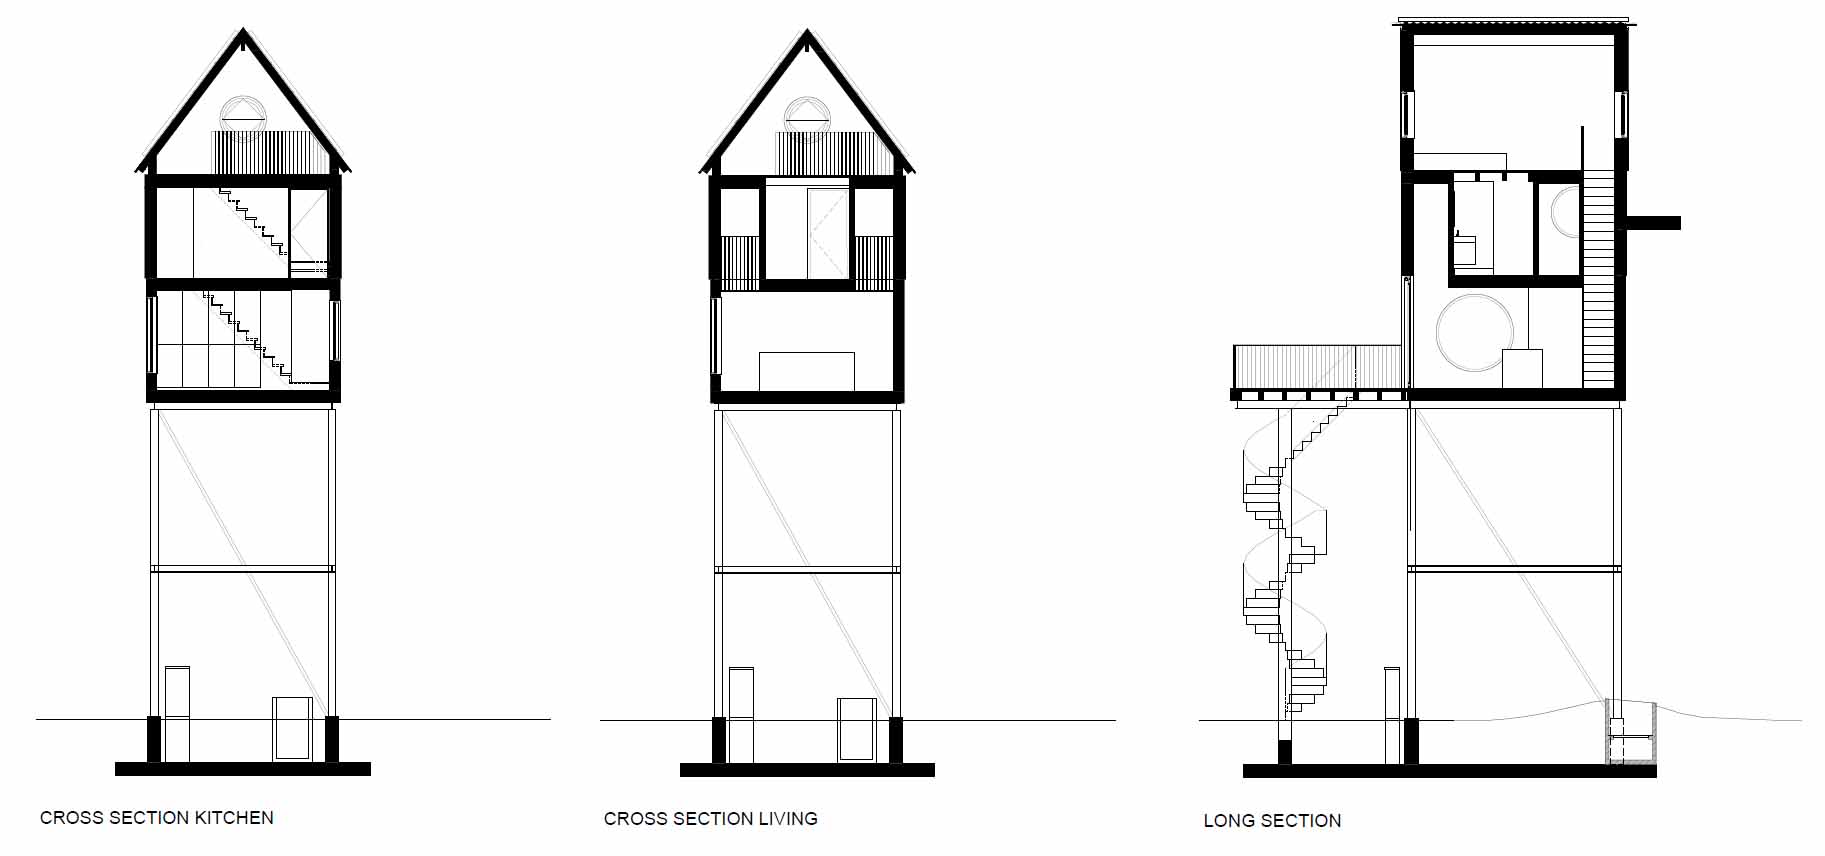 The section drawings of a small elevated cabin.